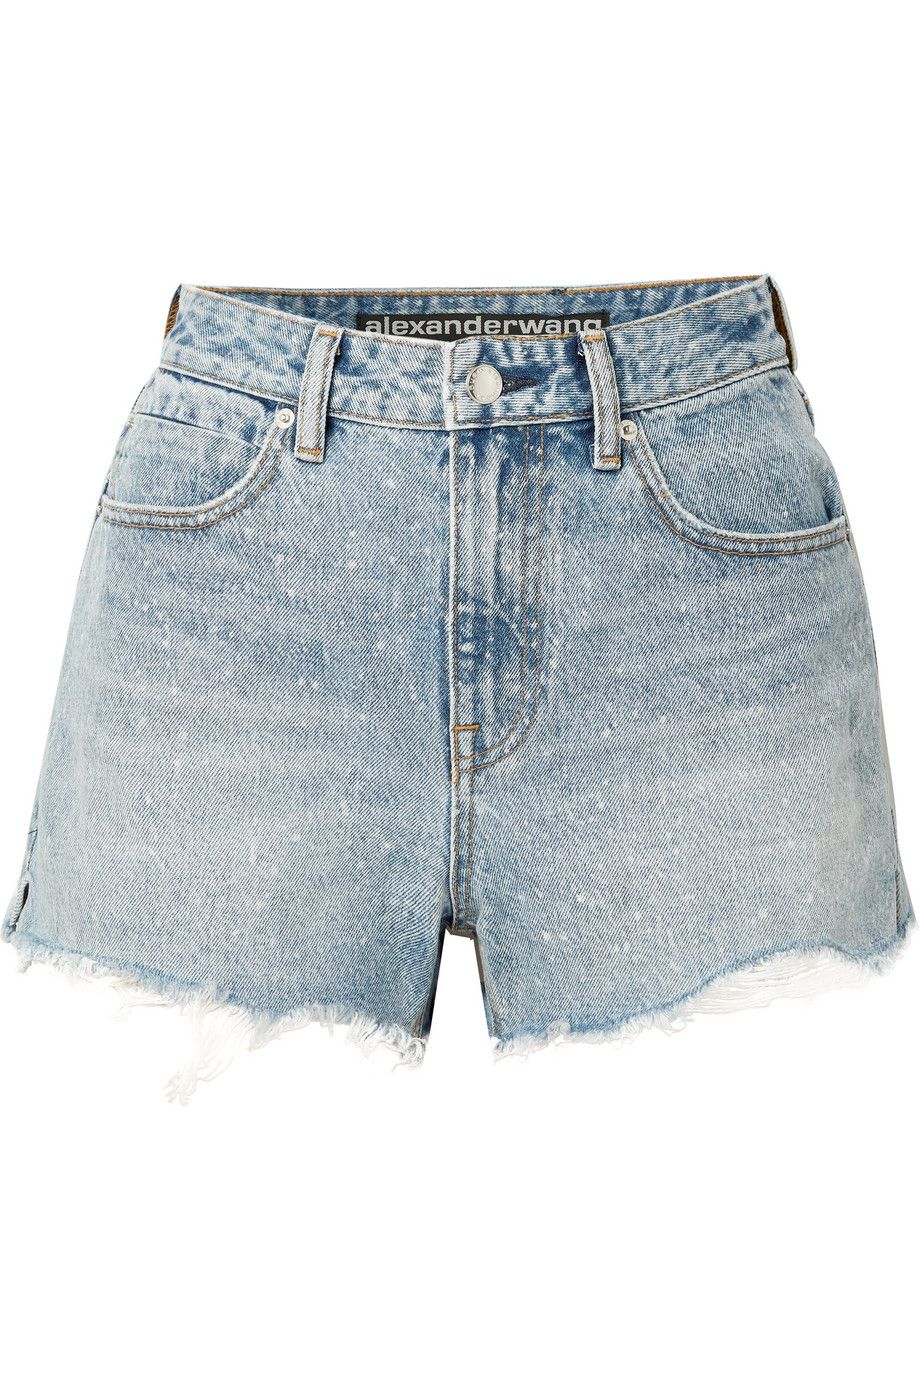 Y/Project Releases Denim Brief-Style Short Shorts & the Internet